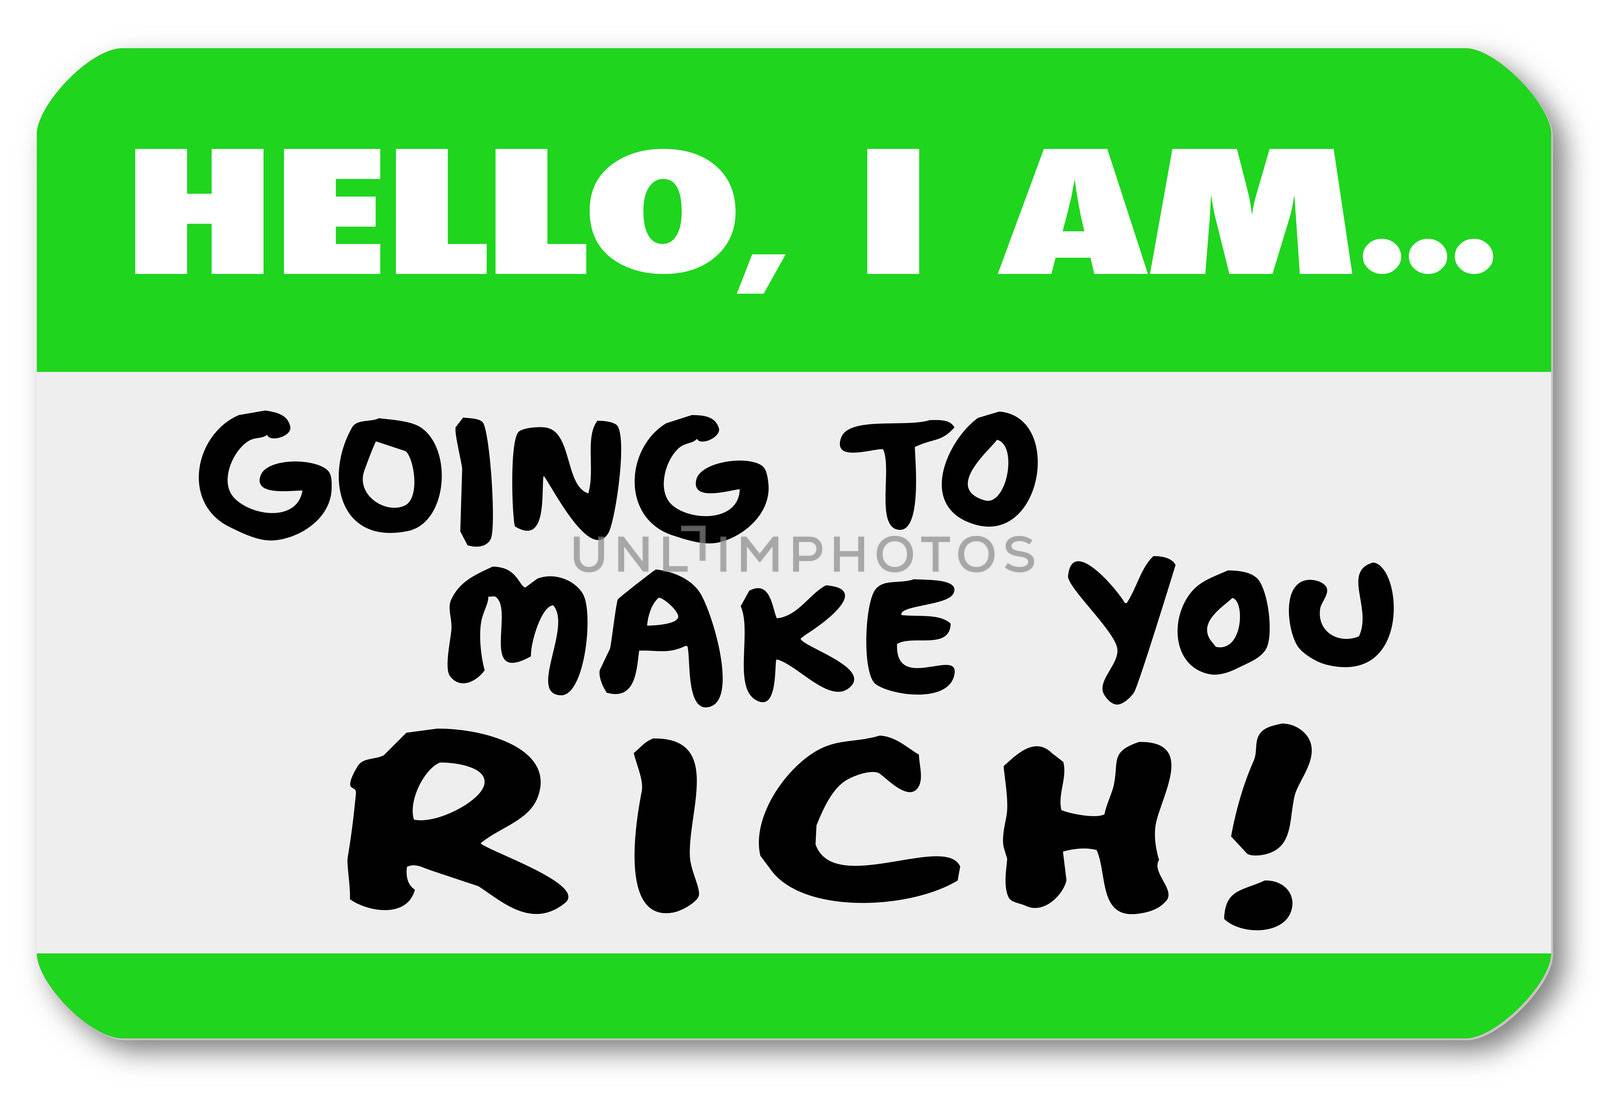 A namtag sticker with the words Hello I Am Going to Make You Rich, telling you of a plan or opportunity to grow your wealth and make a lot of money, but is it a scheme, scam or con job?